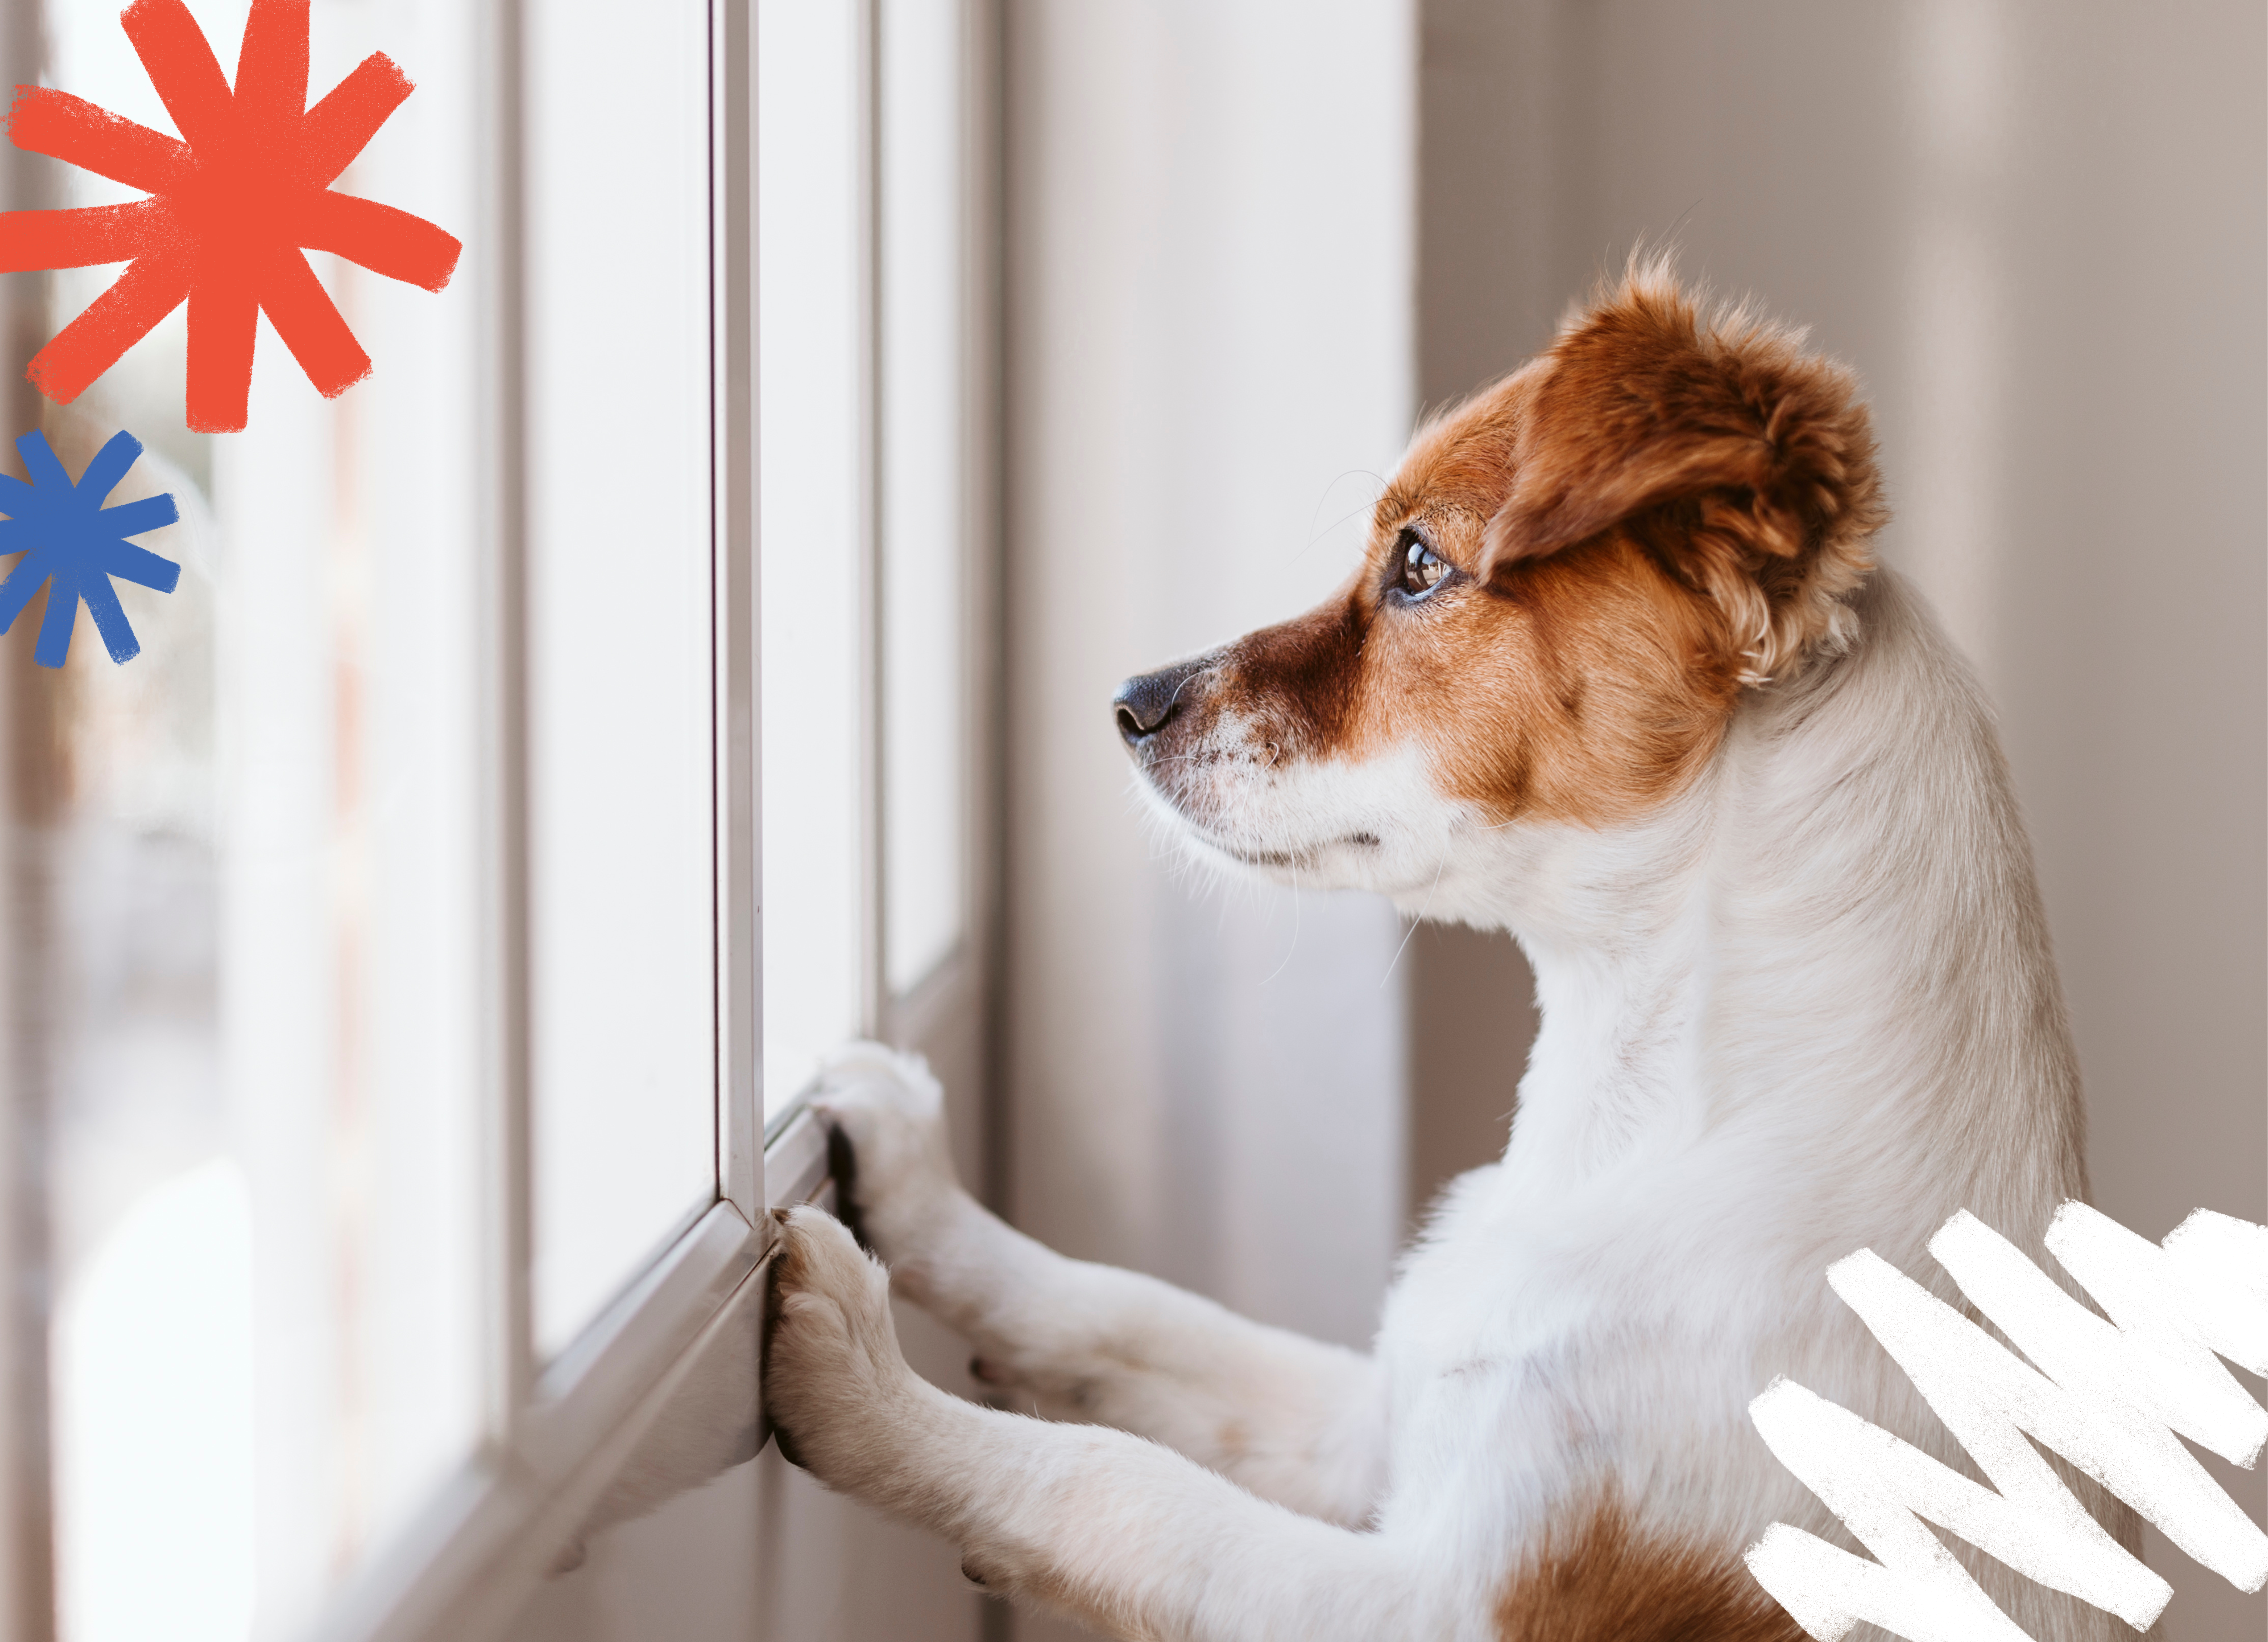 Tan and white jack russell dog standing with its paws on a window as it looks outside